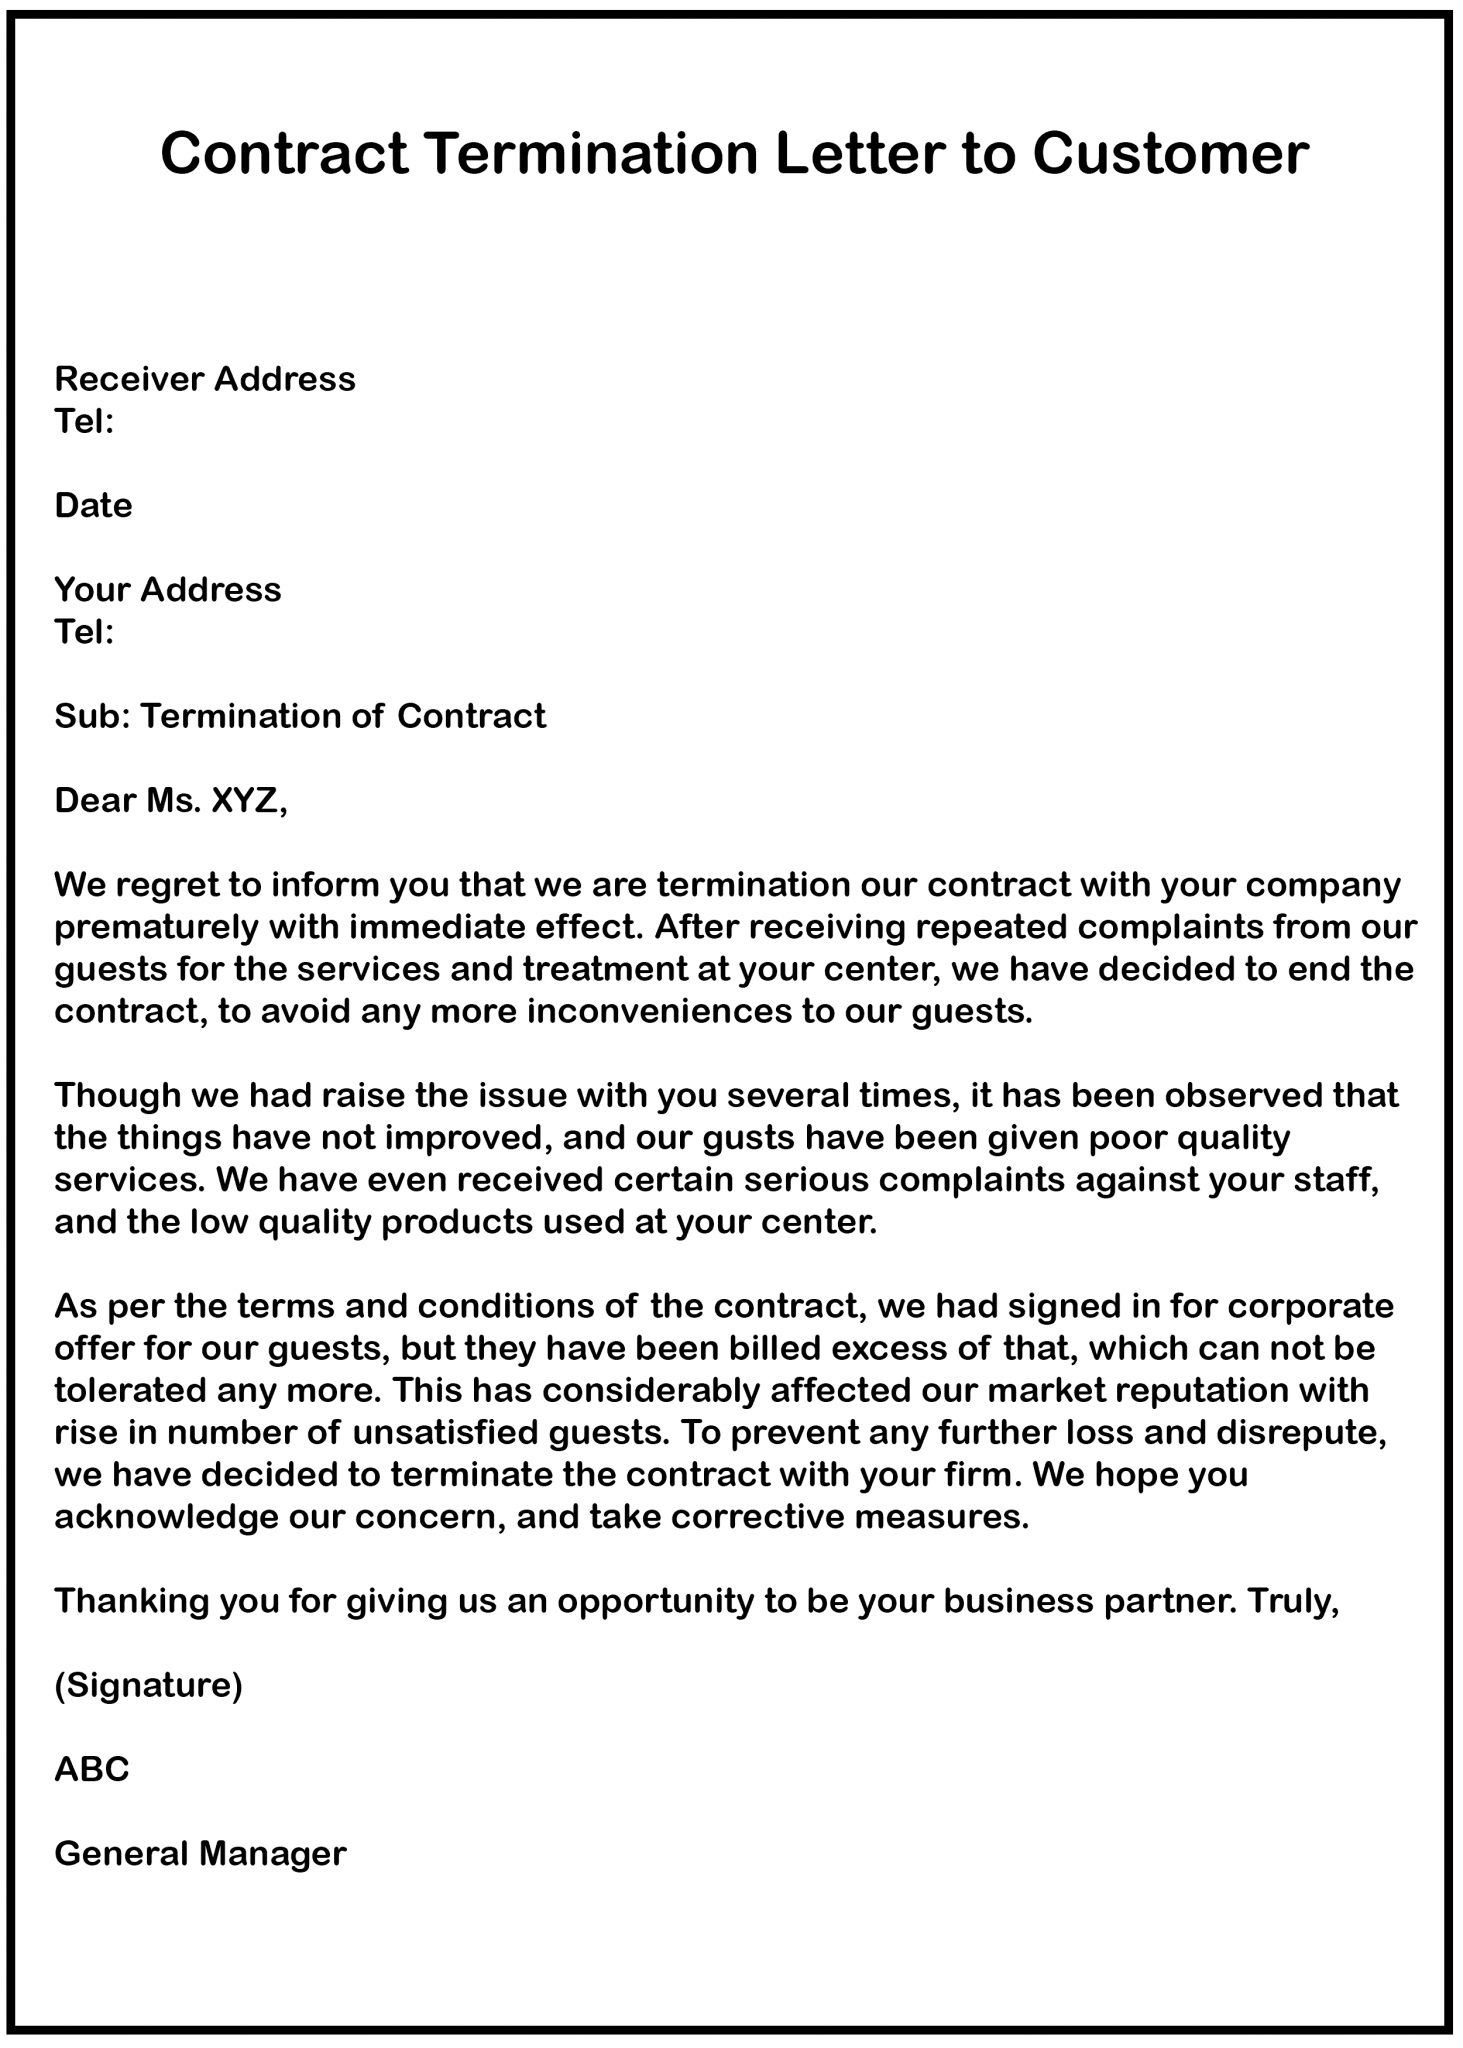 7  Business Contract Termination Letter Samples HowToWiki